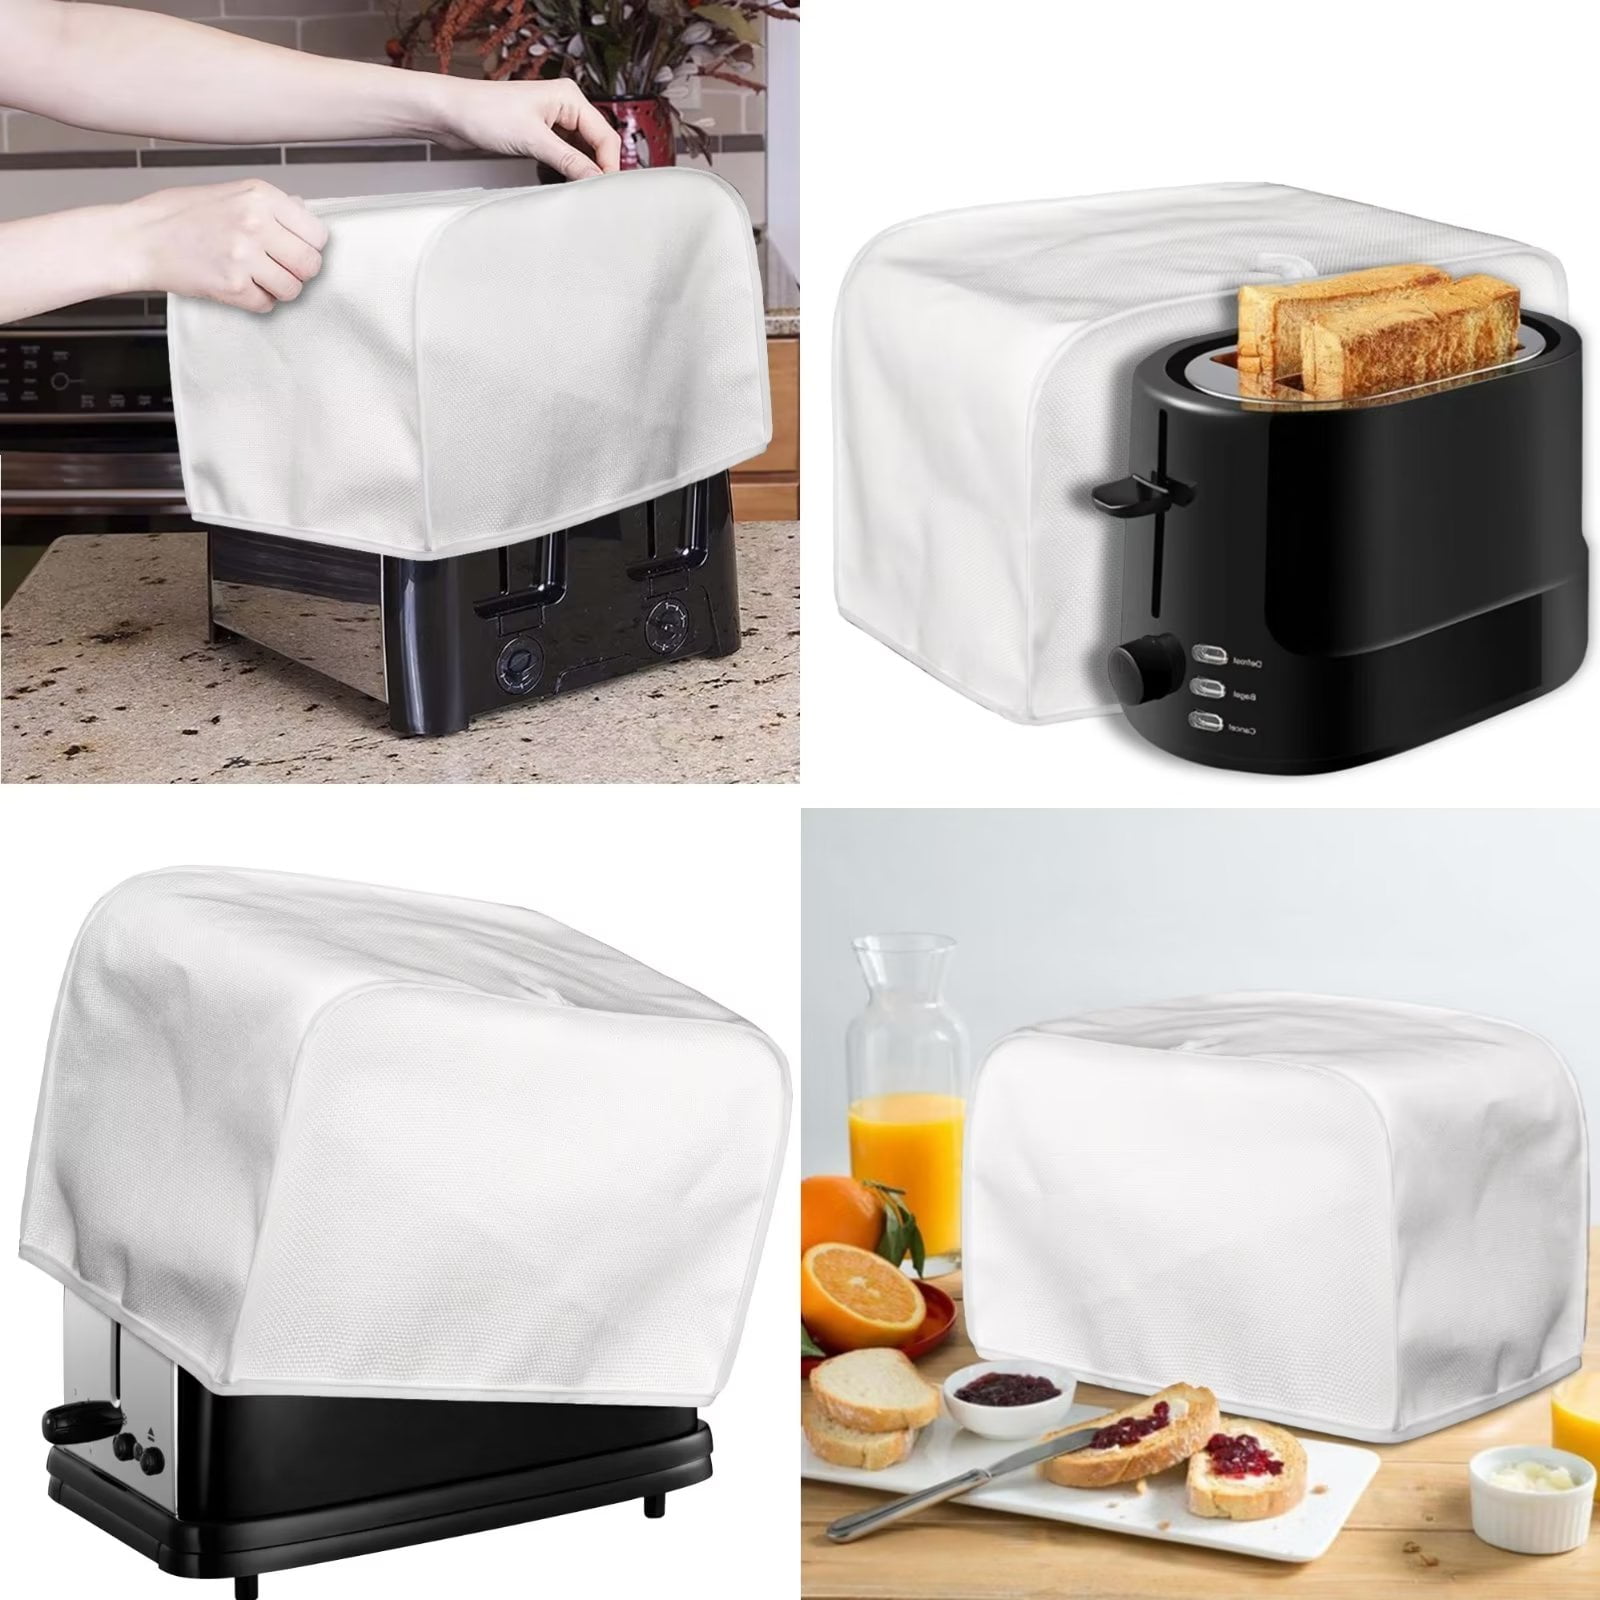 10pcs Kitchen Appliance Covers Elastic Dust Proof Cover For Toaster Oven  Blender